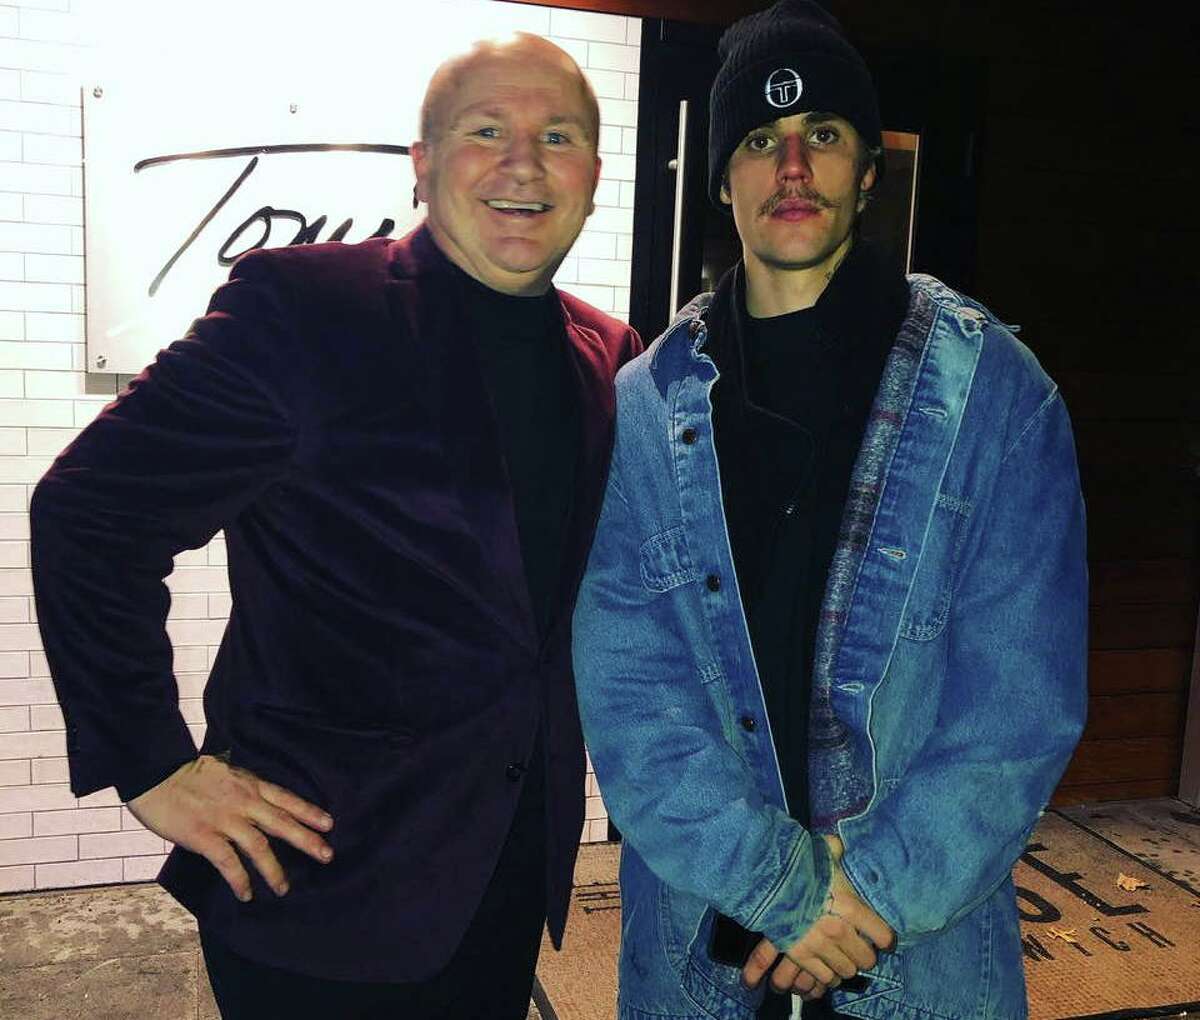 Tony Capasso of Tony’s at the JHouse in Riverside with Justin "The Biebs" Bieber last week.